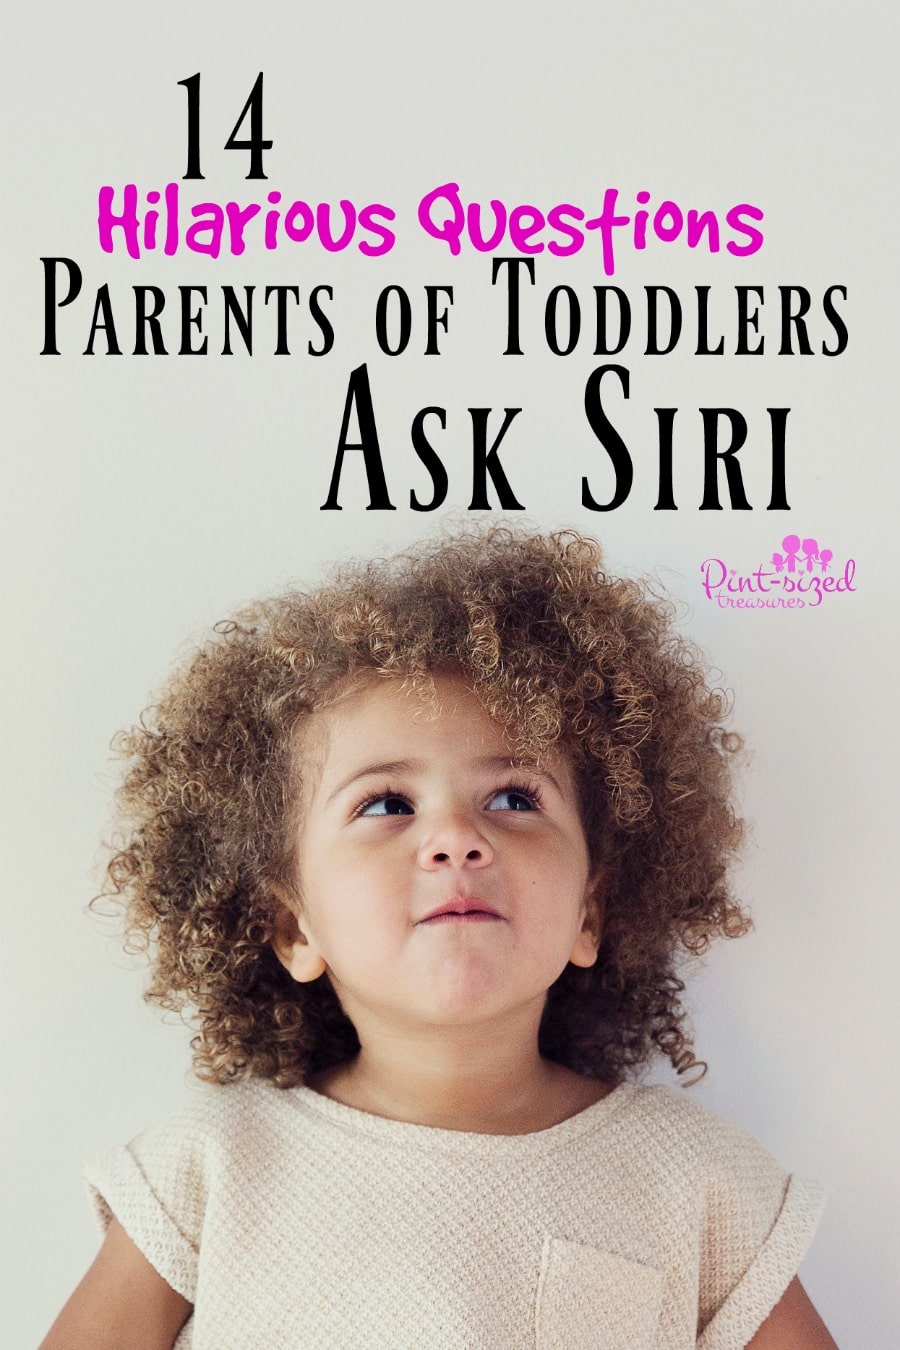 hilarious questions parents of toddlers ask Siri